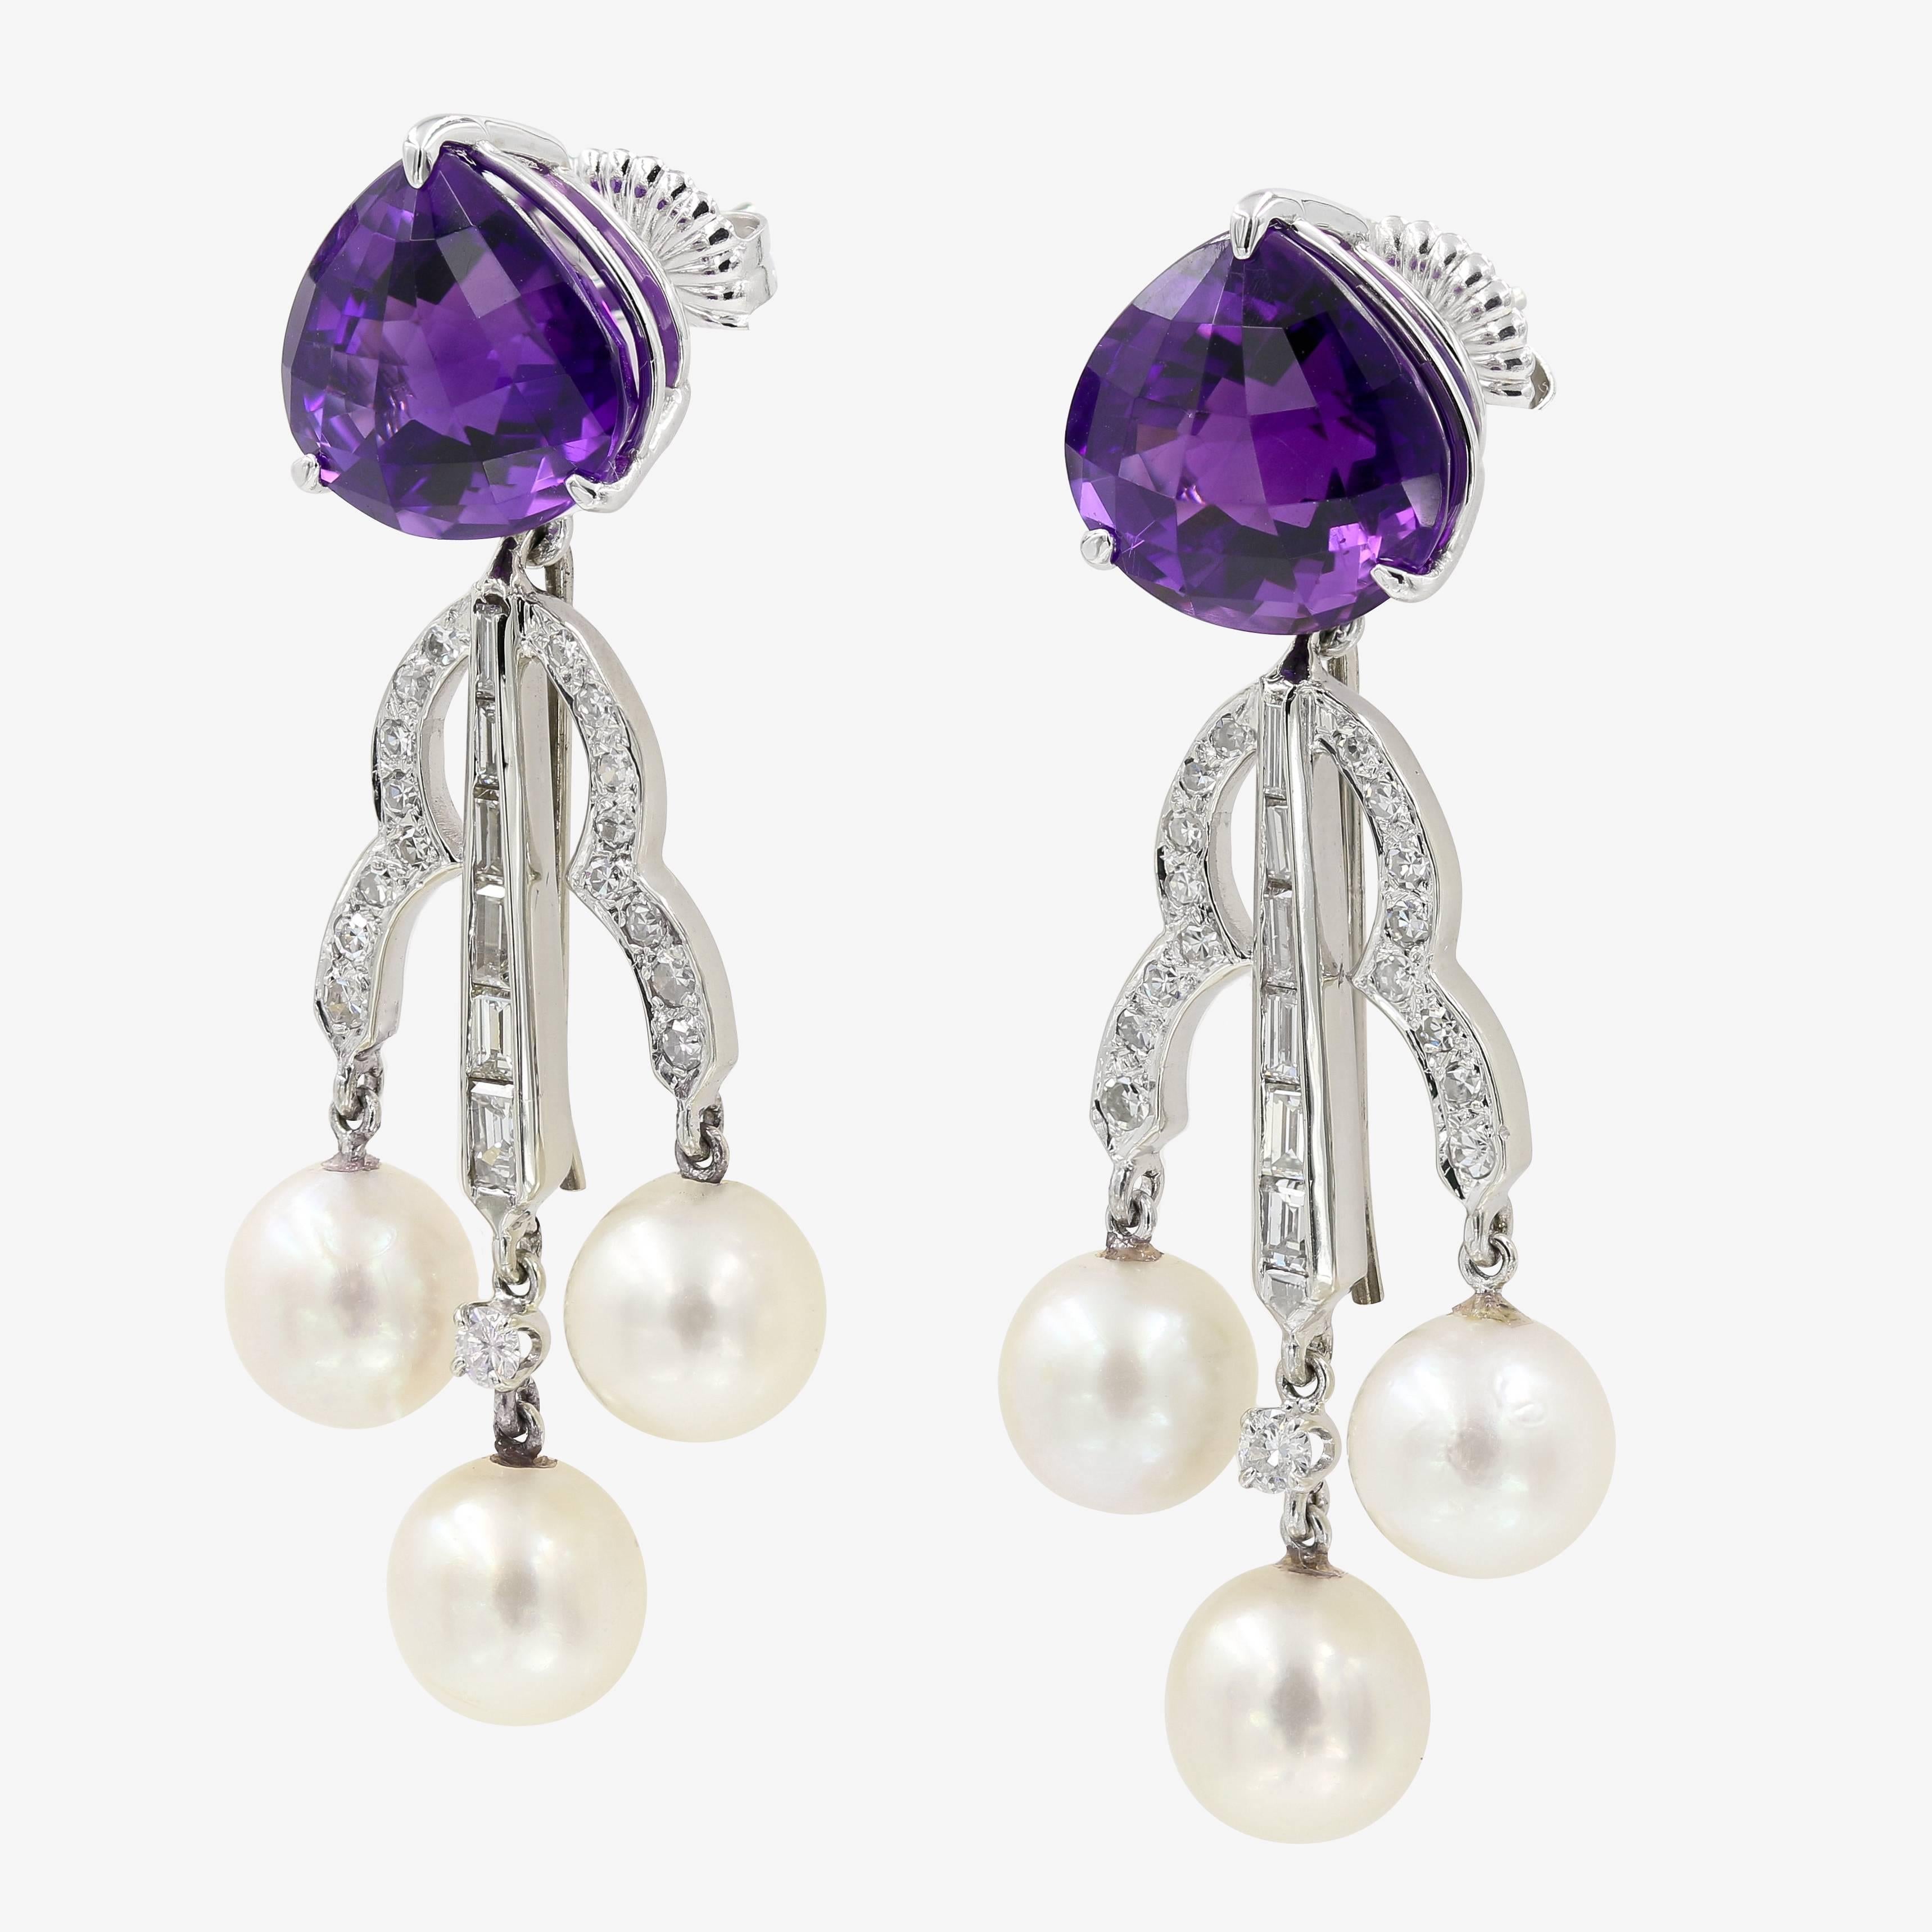 Contemporary Fancy Cut Amethyst, Diamond, and Pearl Dangle Earrings in White Gold